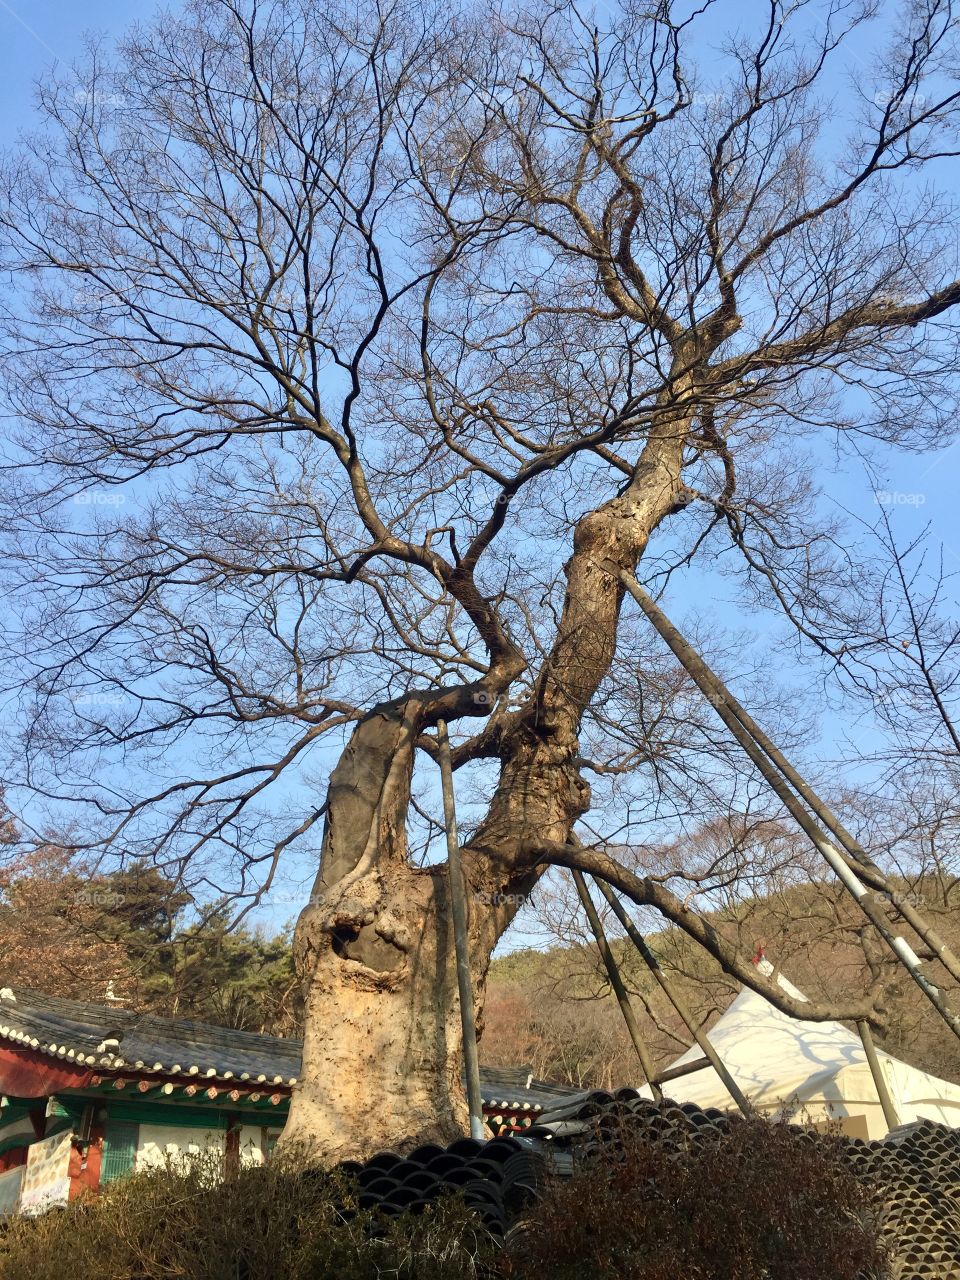 One of the oldest tree in SoKor